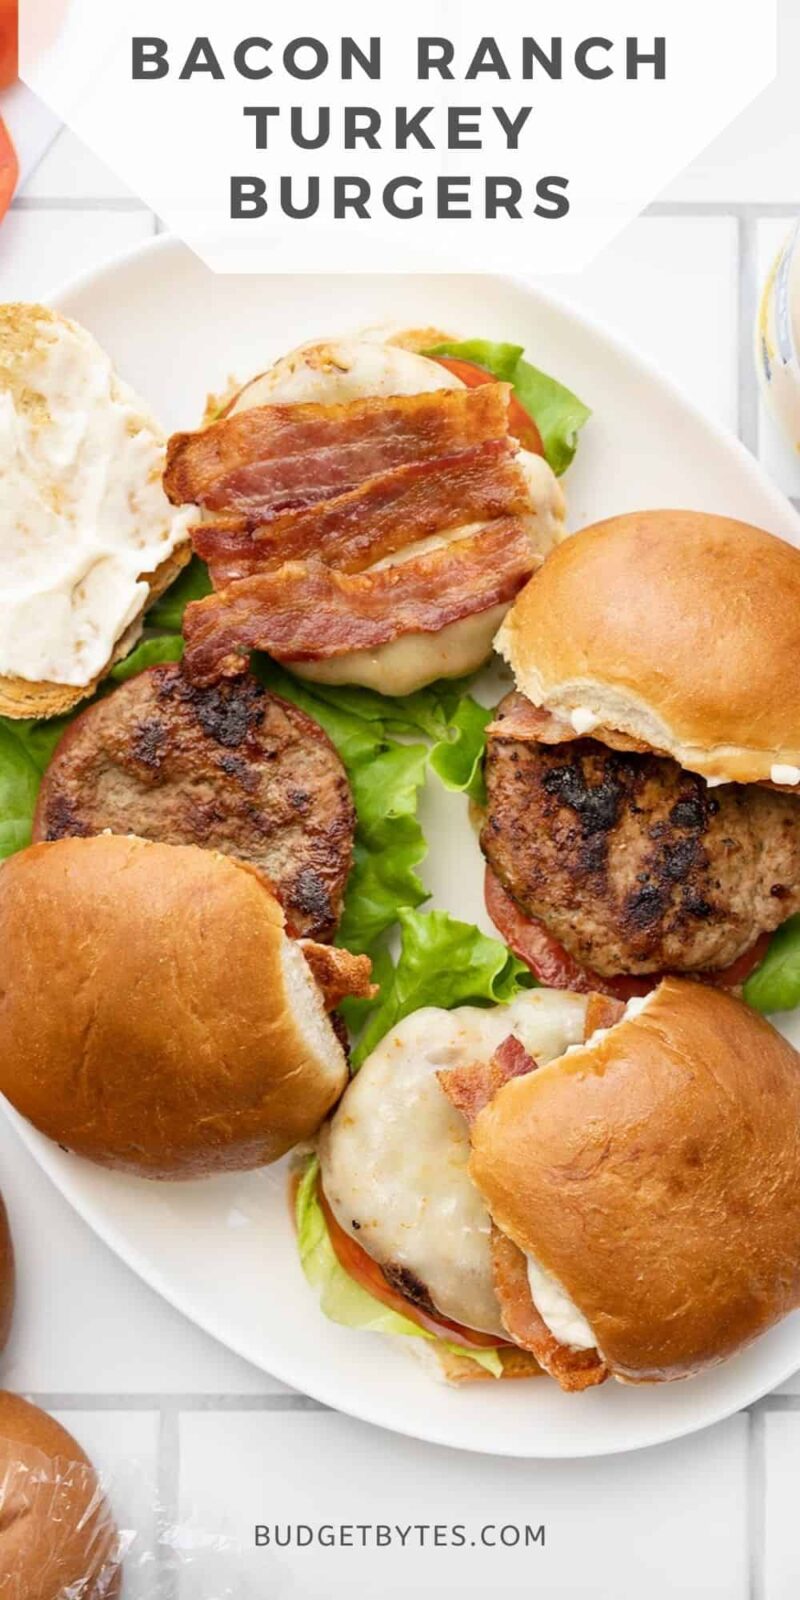 Bacon Ranch Turkey Burgers on a platter, title text at the top